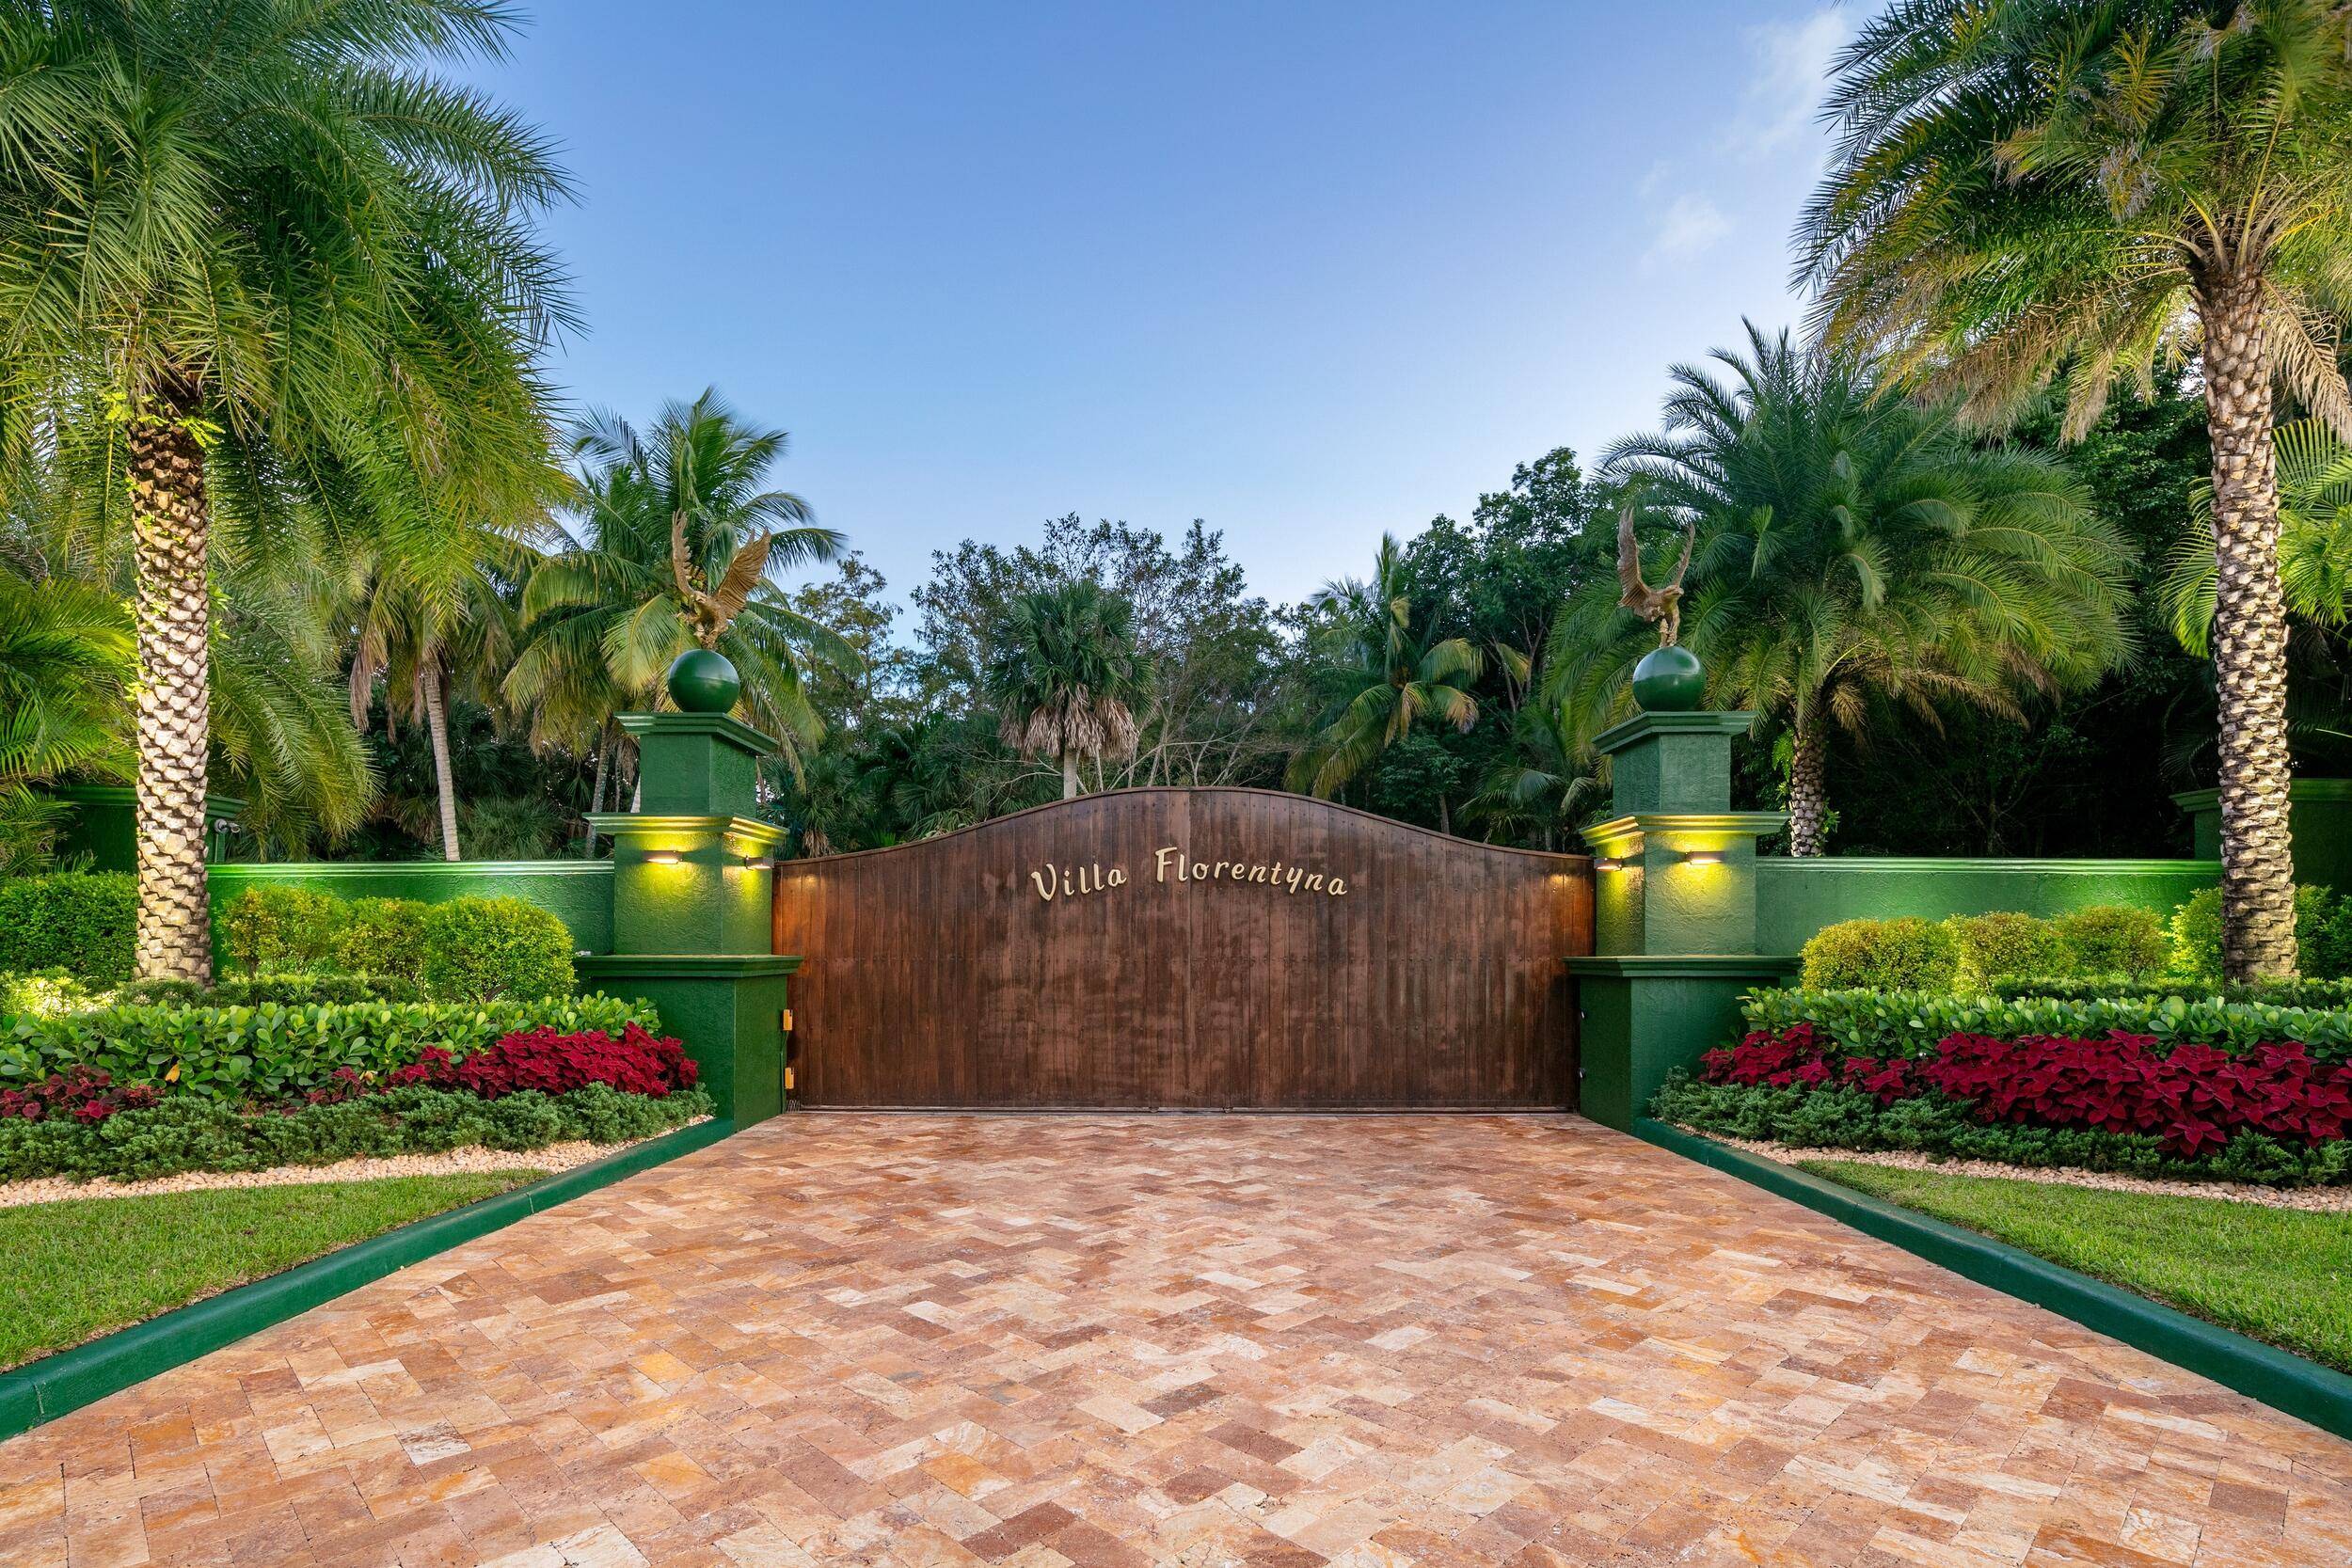 Experience the ultimate in luxury and privacy at Villa Florentyna, a stunning trophy manor nestled in a private alcove in Boca Raton.